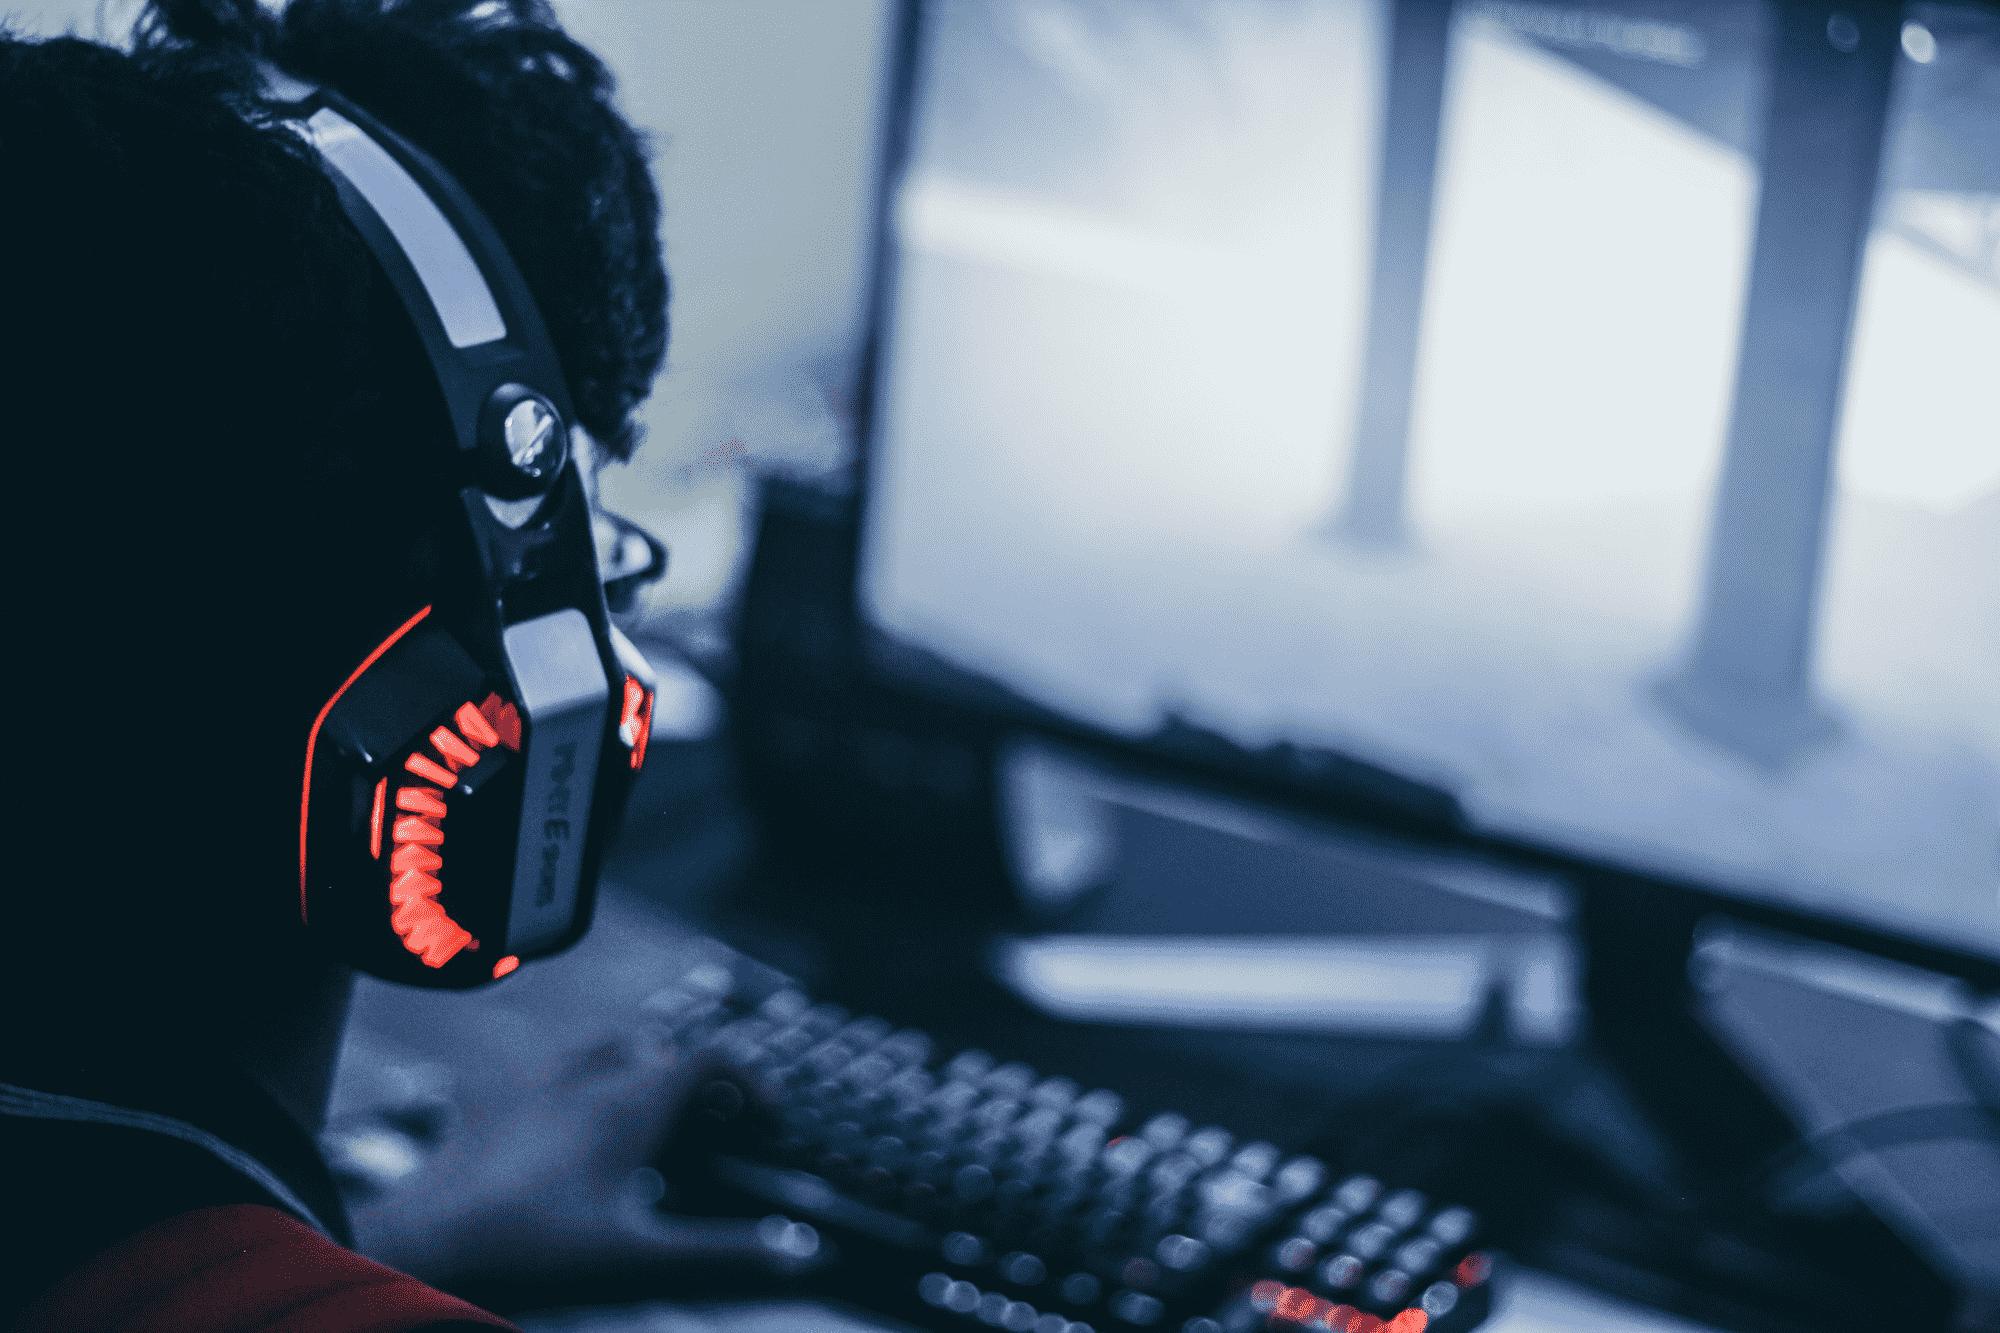 #What Does It Mean To Be A True Gamer Influencer? A Representative Of A Gaming Community? » OmniGeekEmpire